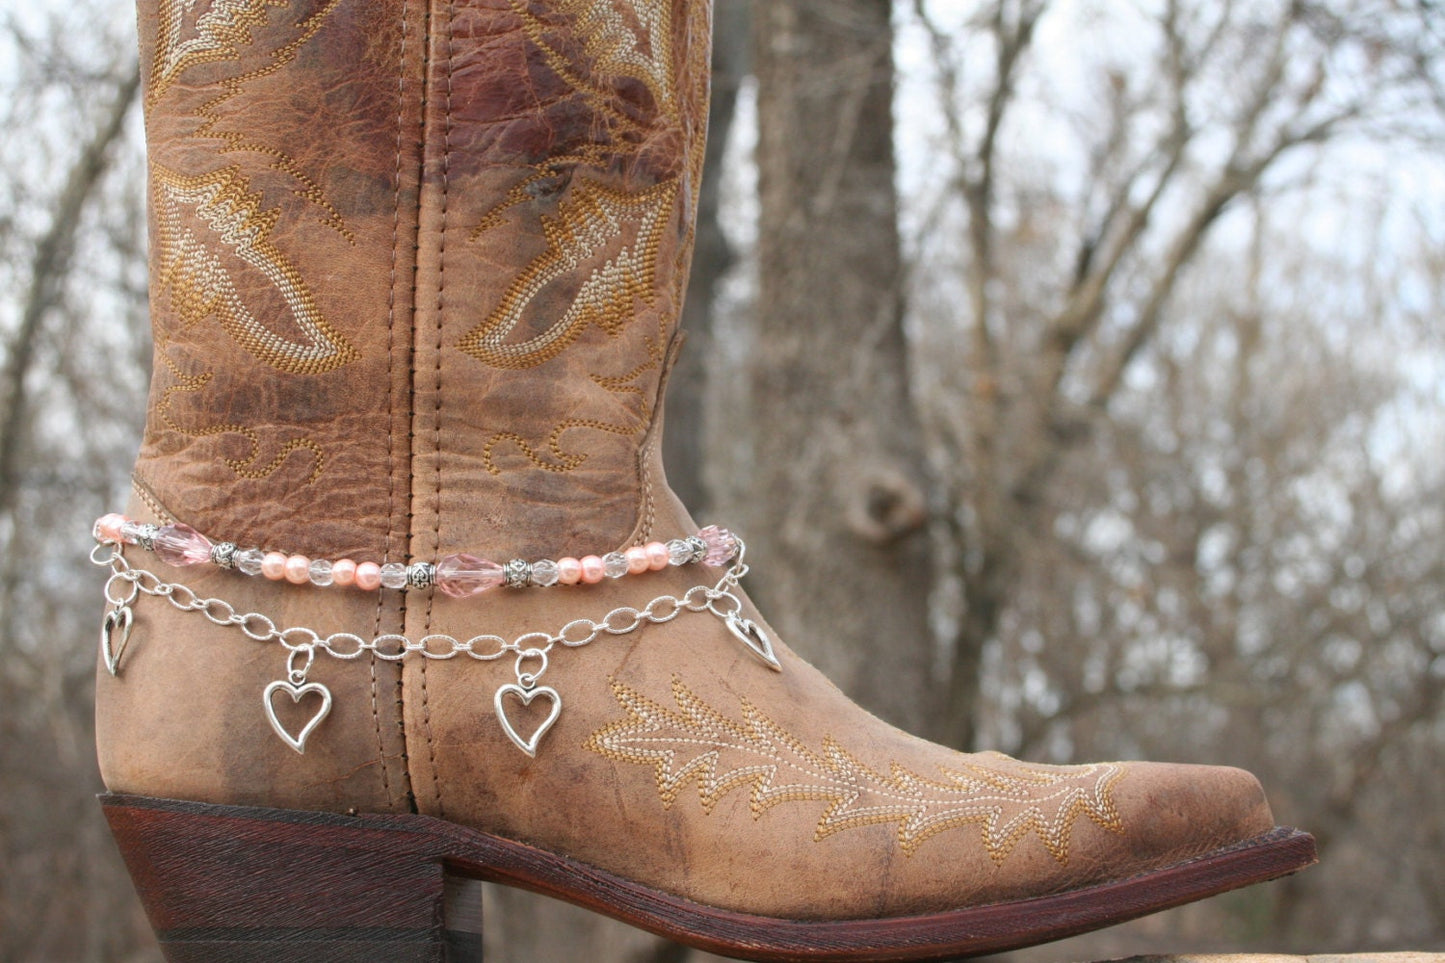 Boot Candy Pink Pearls and Hearts with Chain   608126  Boot Jewelry-Boot Bling-Boot Bracelet-Boot Accessories